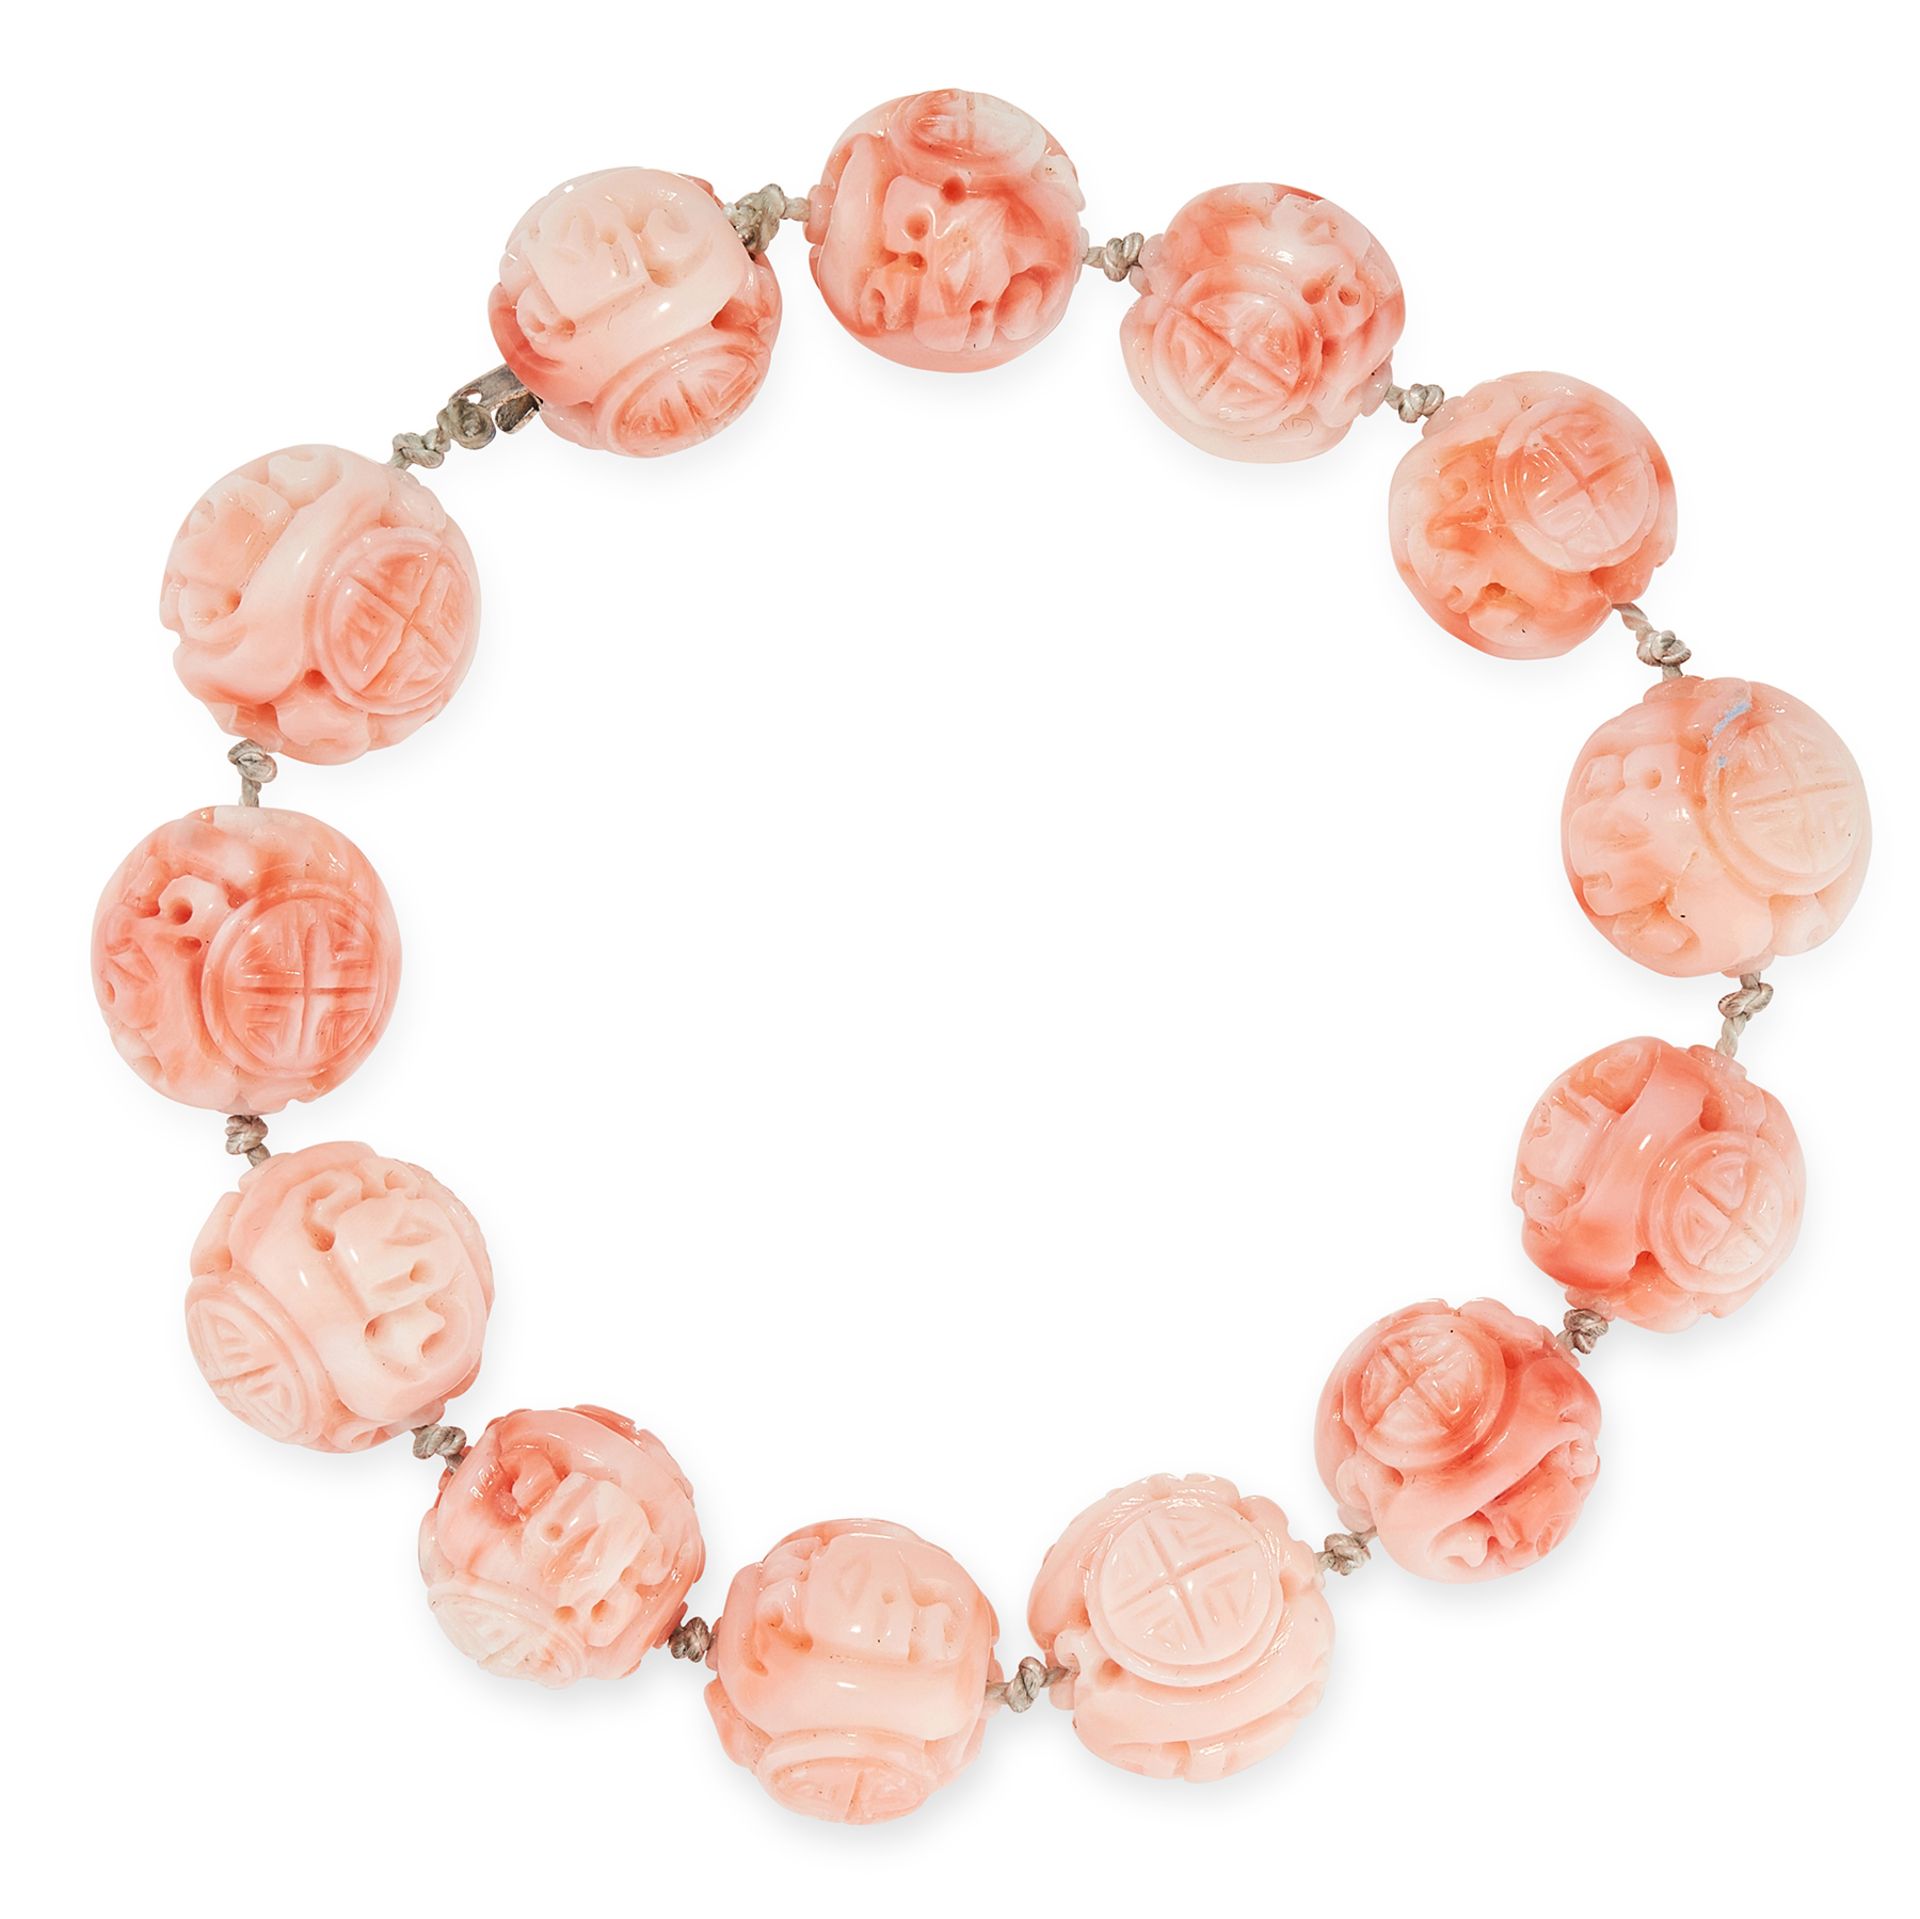 A CHINESE CARVED CORAL BEAD BRACELET comprising of a single row of thirteen carved coral beads